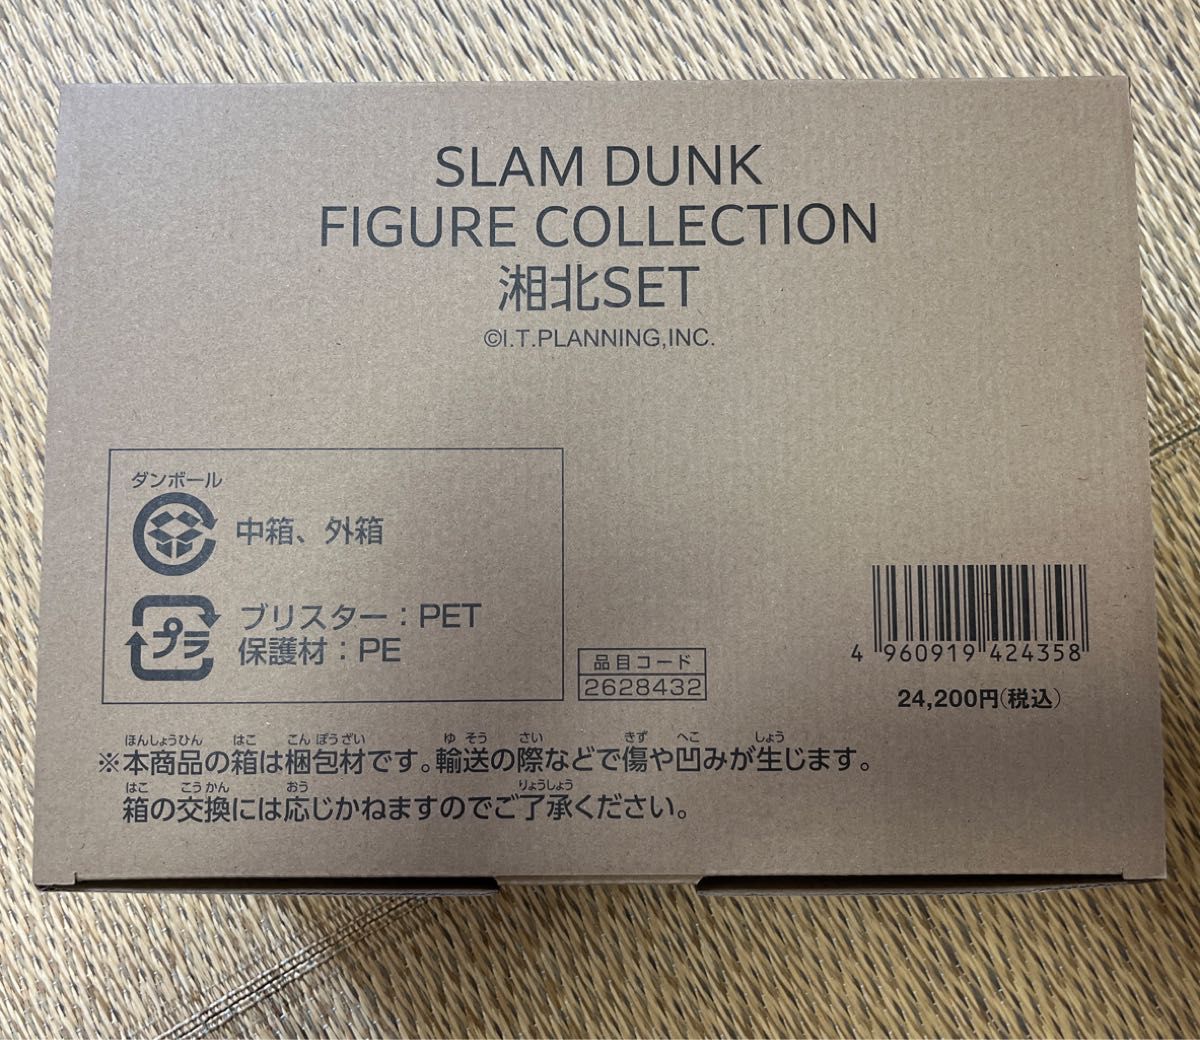 THE FIRST SLAM DUNK FIGURE COLLECTION -湘北-SET スラムダンク